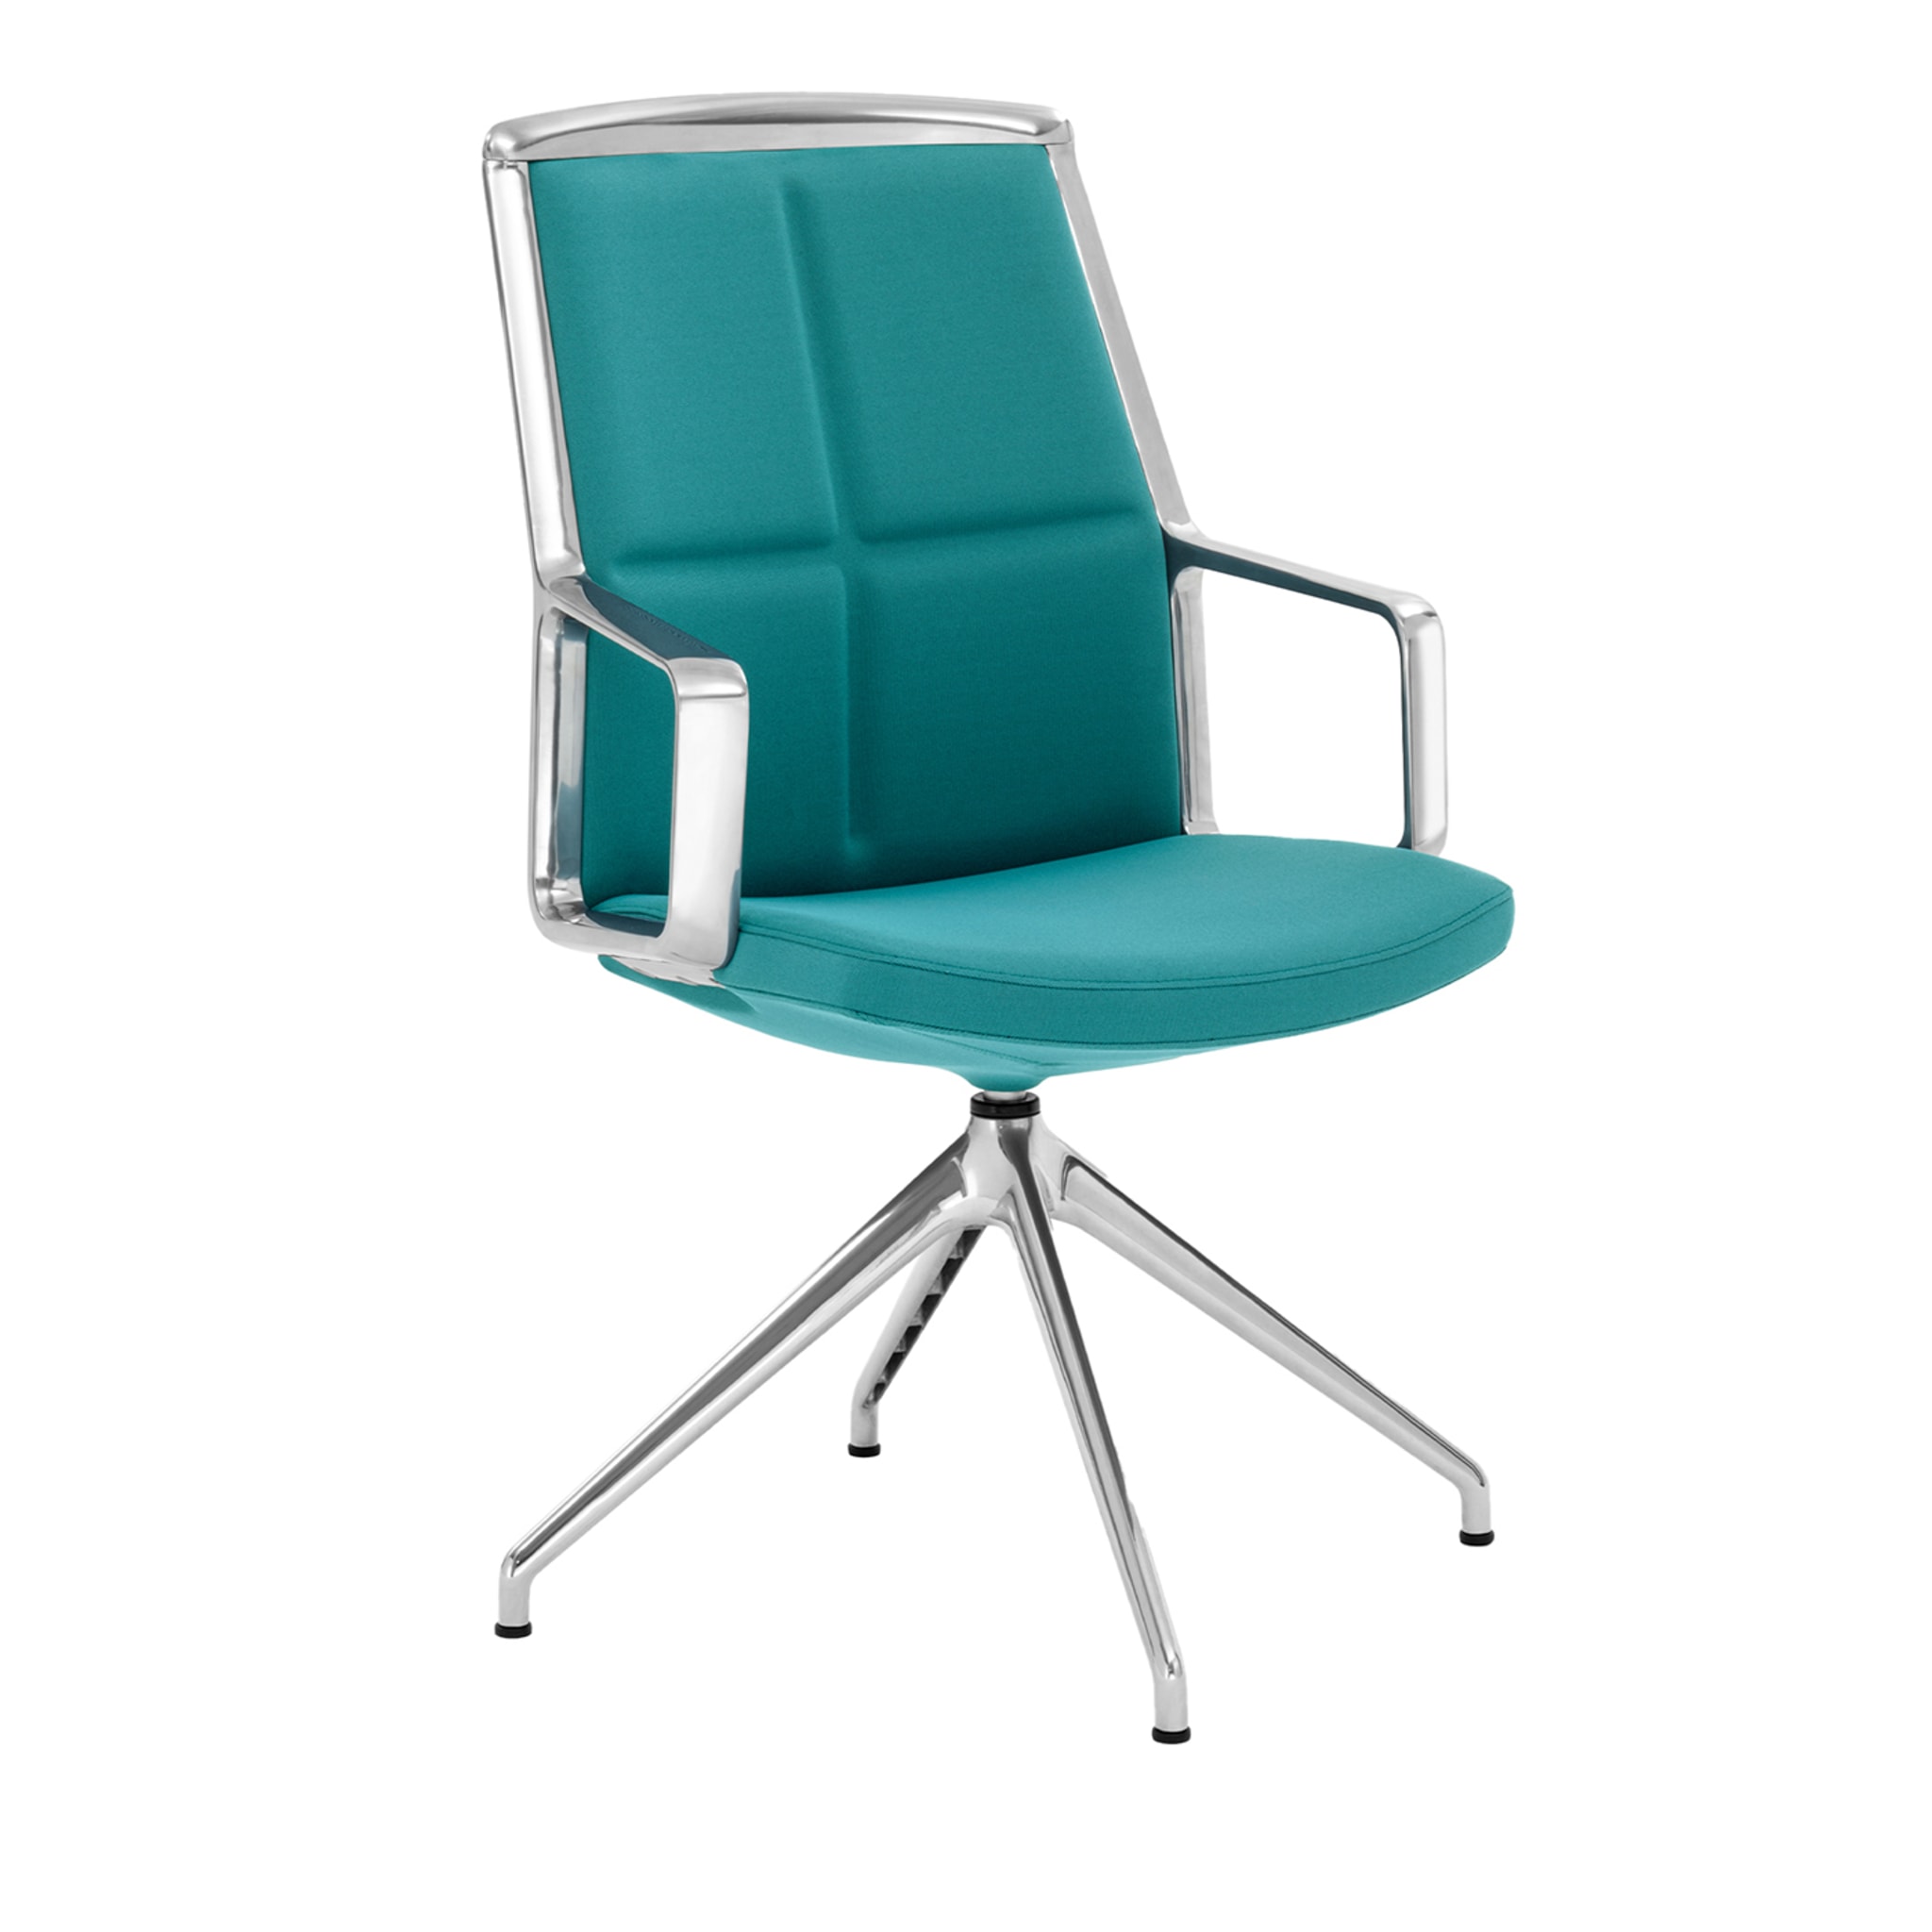 ADELE BLUE-GREEN MEETING CHAIR #2 by ORLANDINIDESIGN - Main view